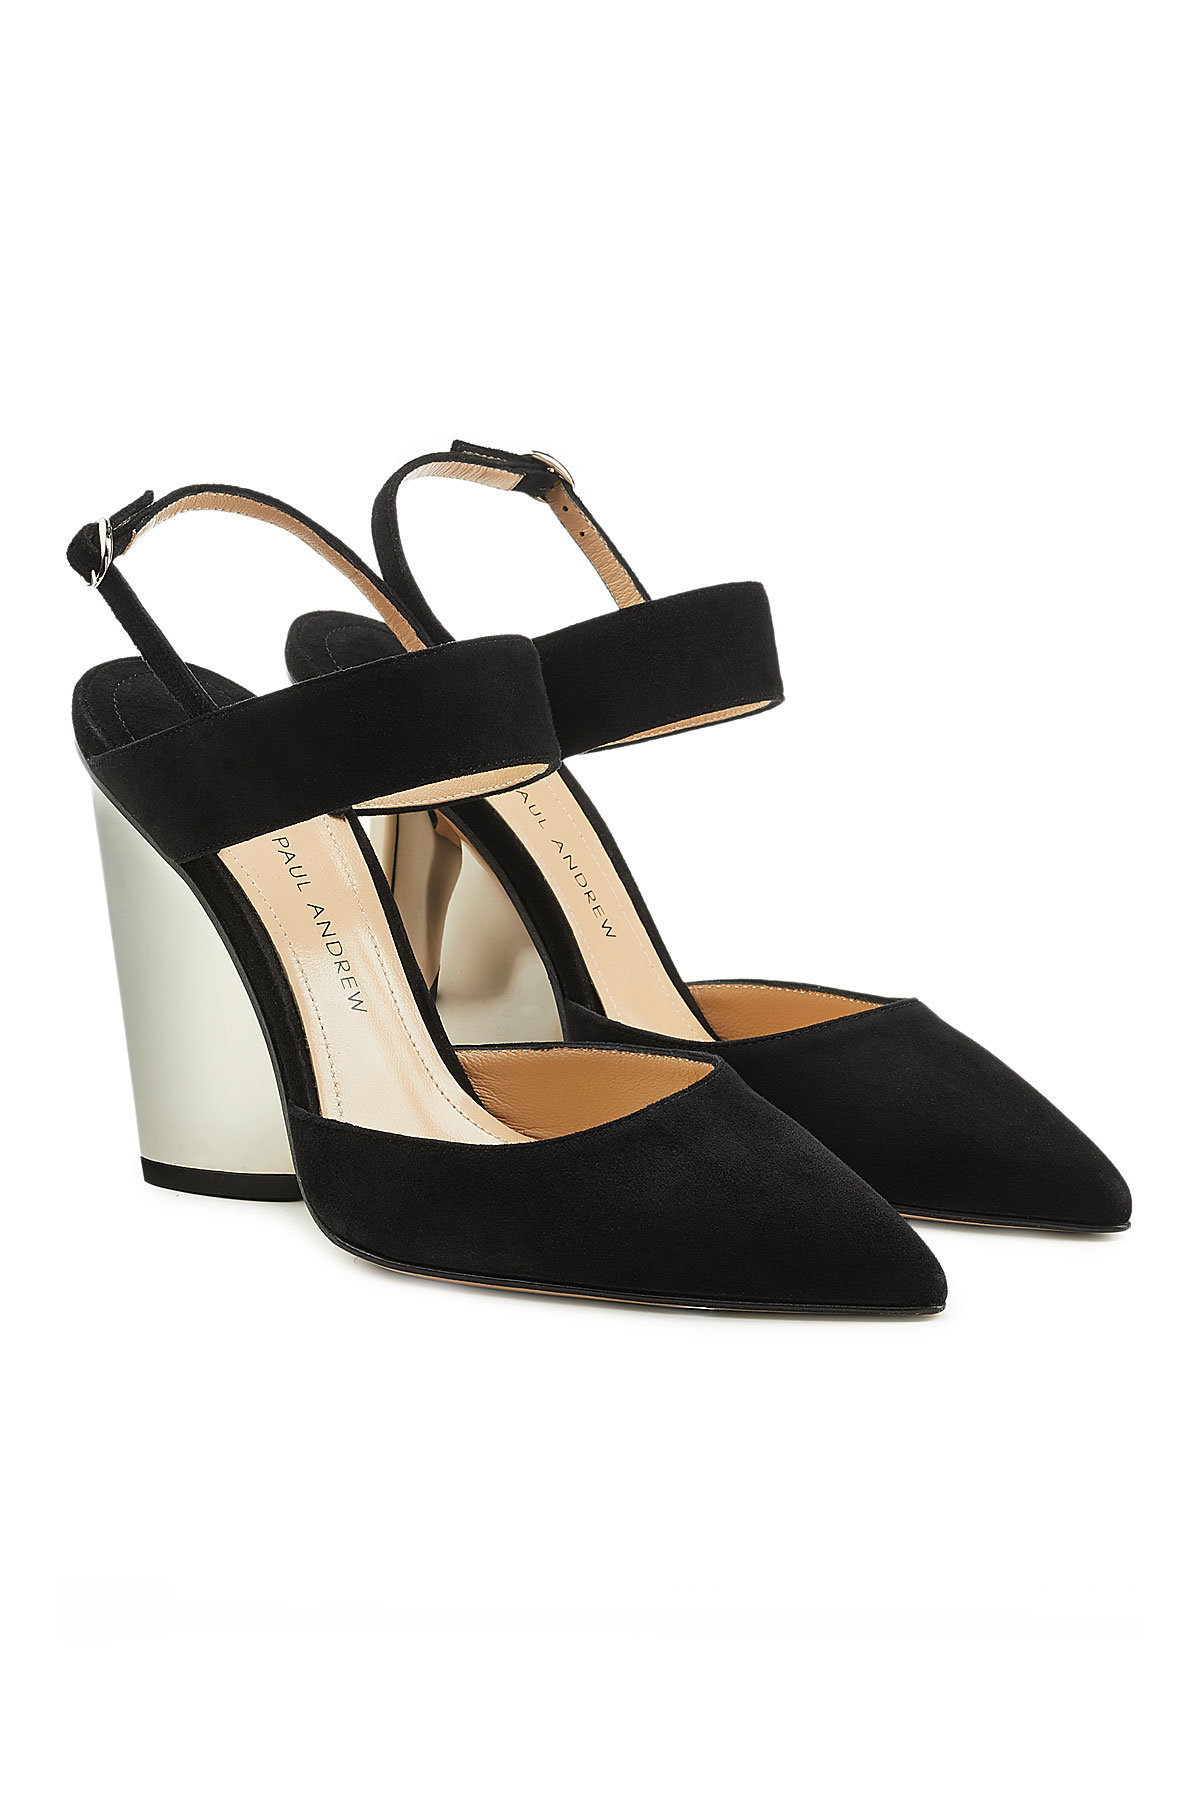 Paul Andrew - Pawson Suede Slingback Pumps